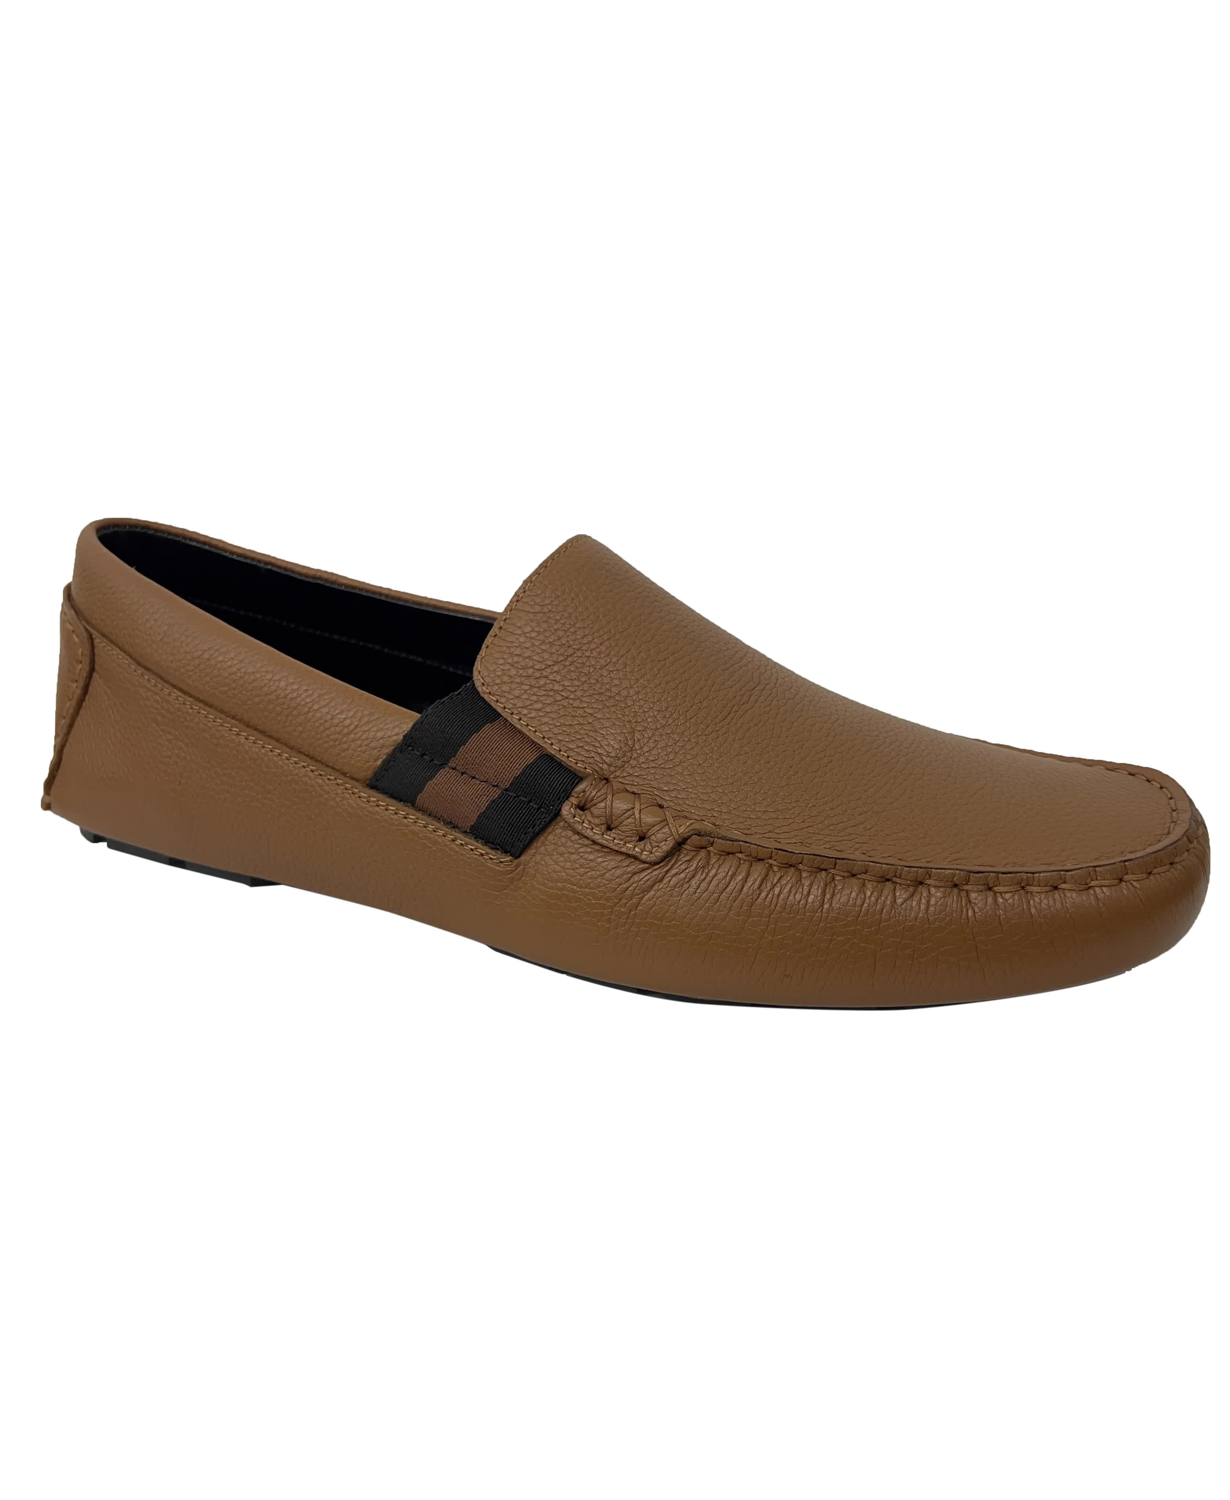 www.couturepoint.com-gucci-mens-brown-leather-praga-slip-on-loafer-shoes